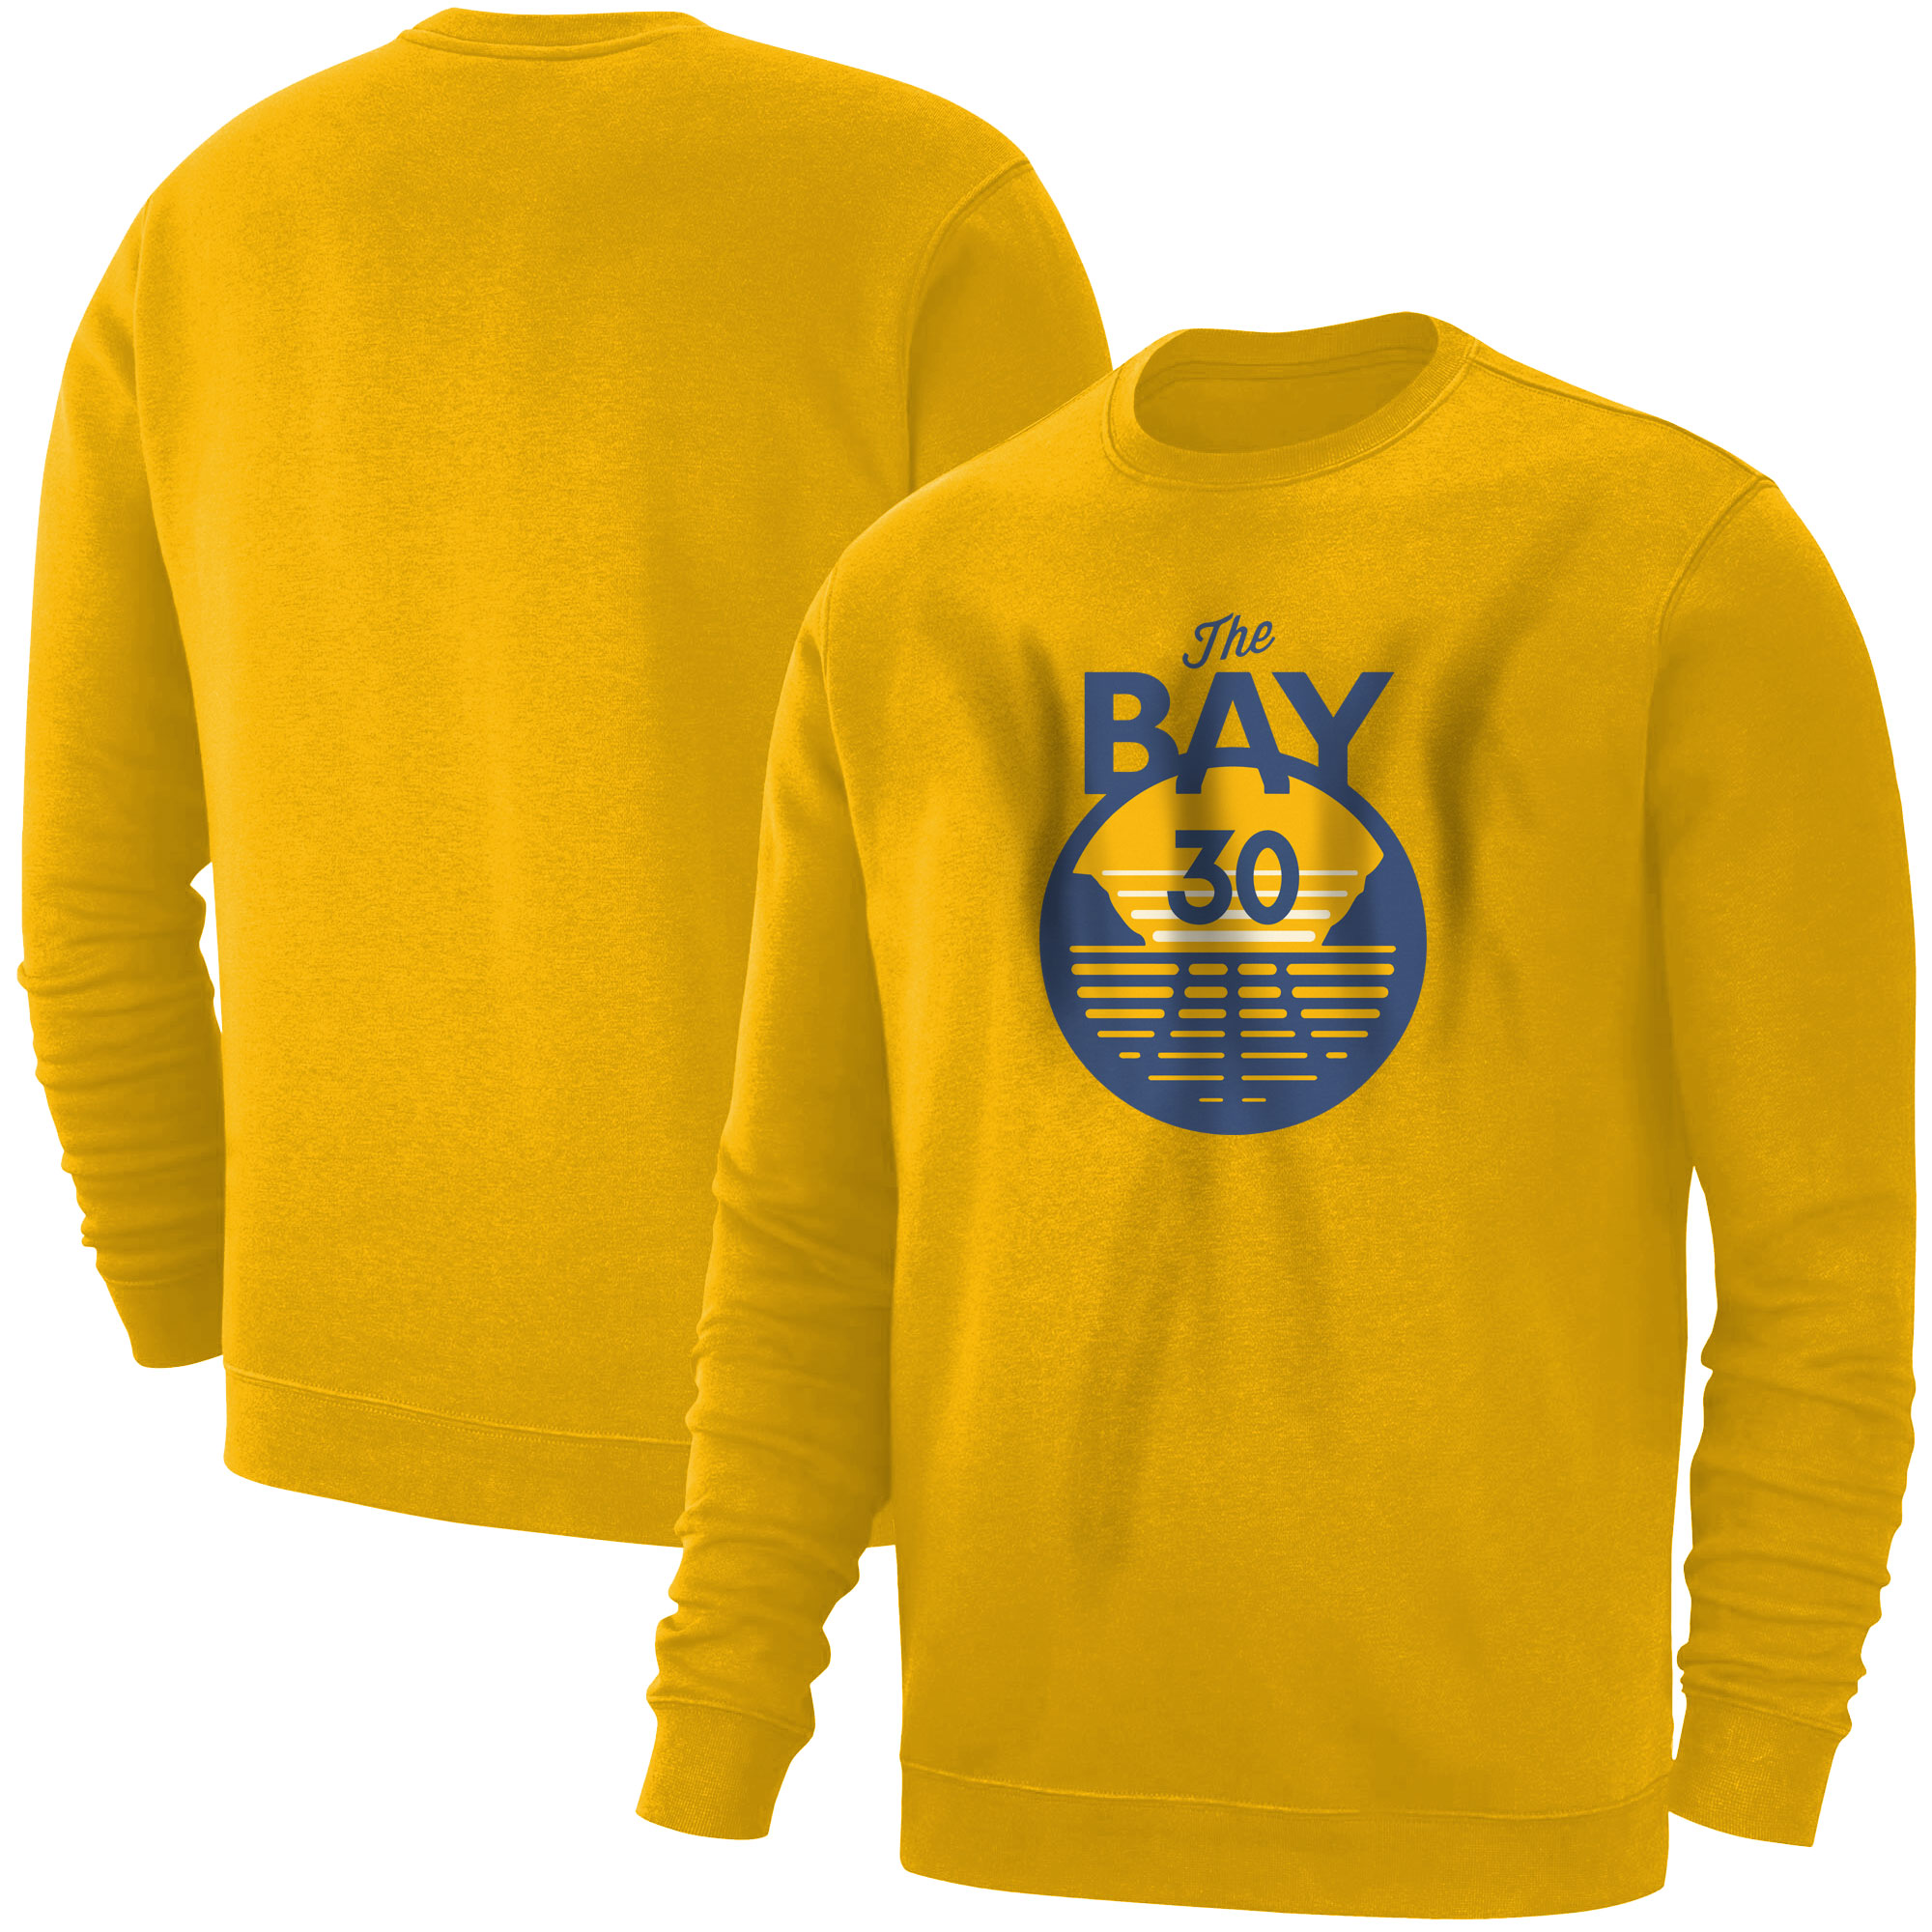 Curry The Bay Basic (BSC-YLW-437-THE-BAY)